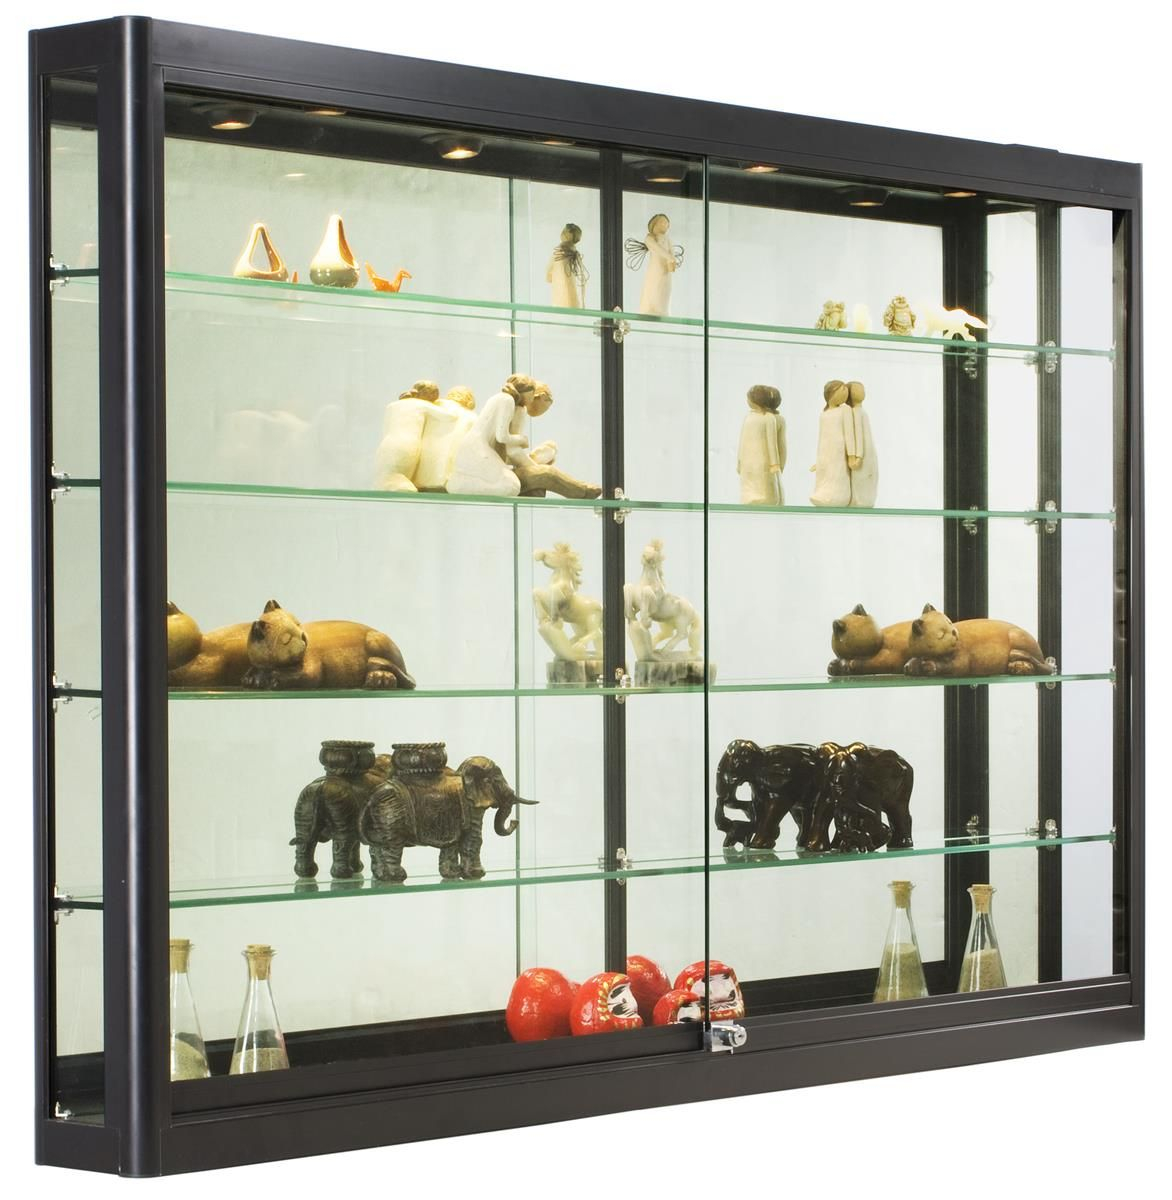 5ft Wall Mounted Display Case W4 Top Halogen Lights Mirror Back intended for dimensions 1172 X 1200